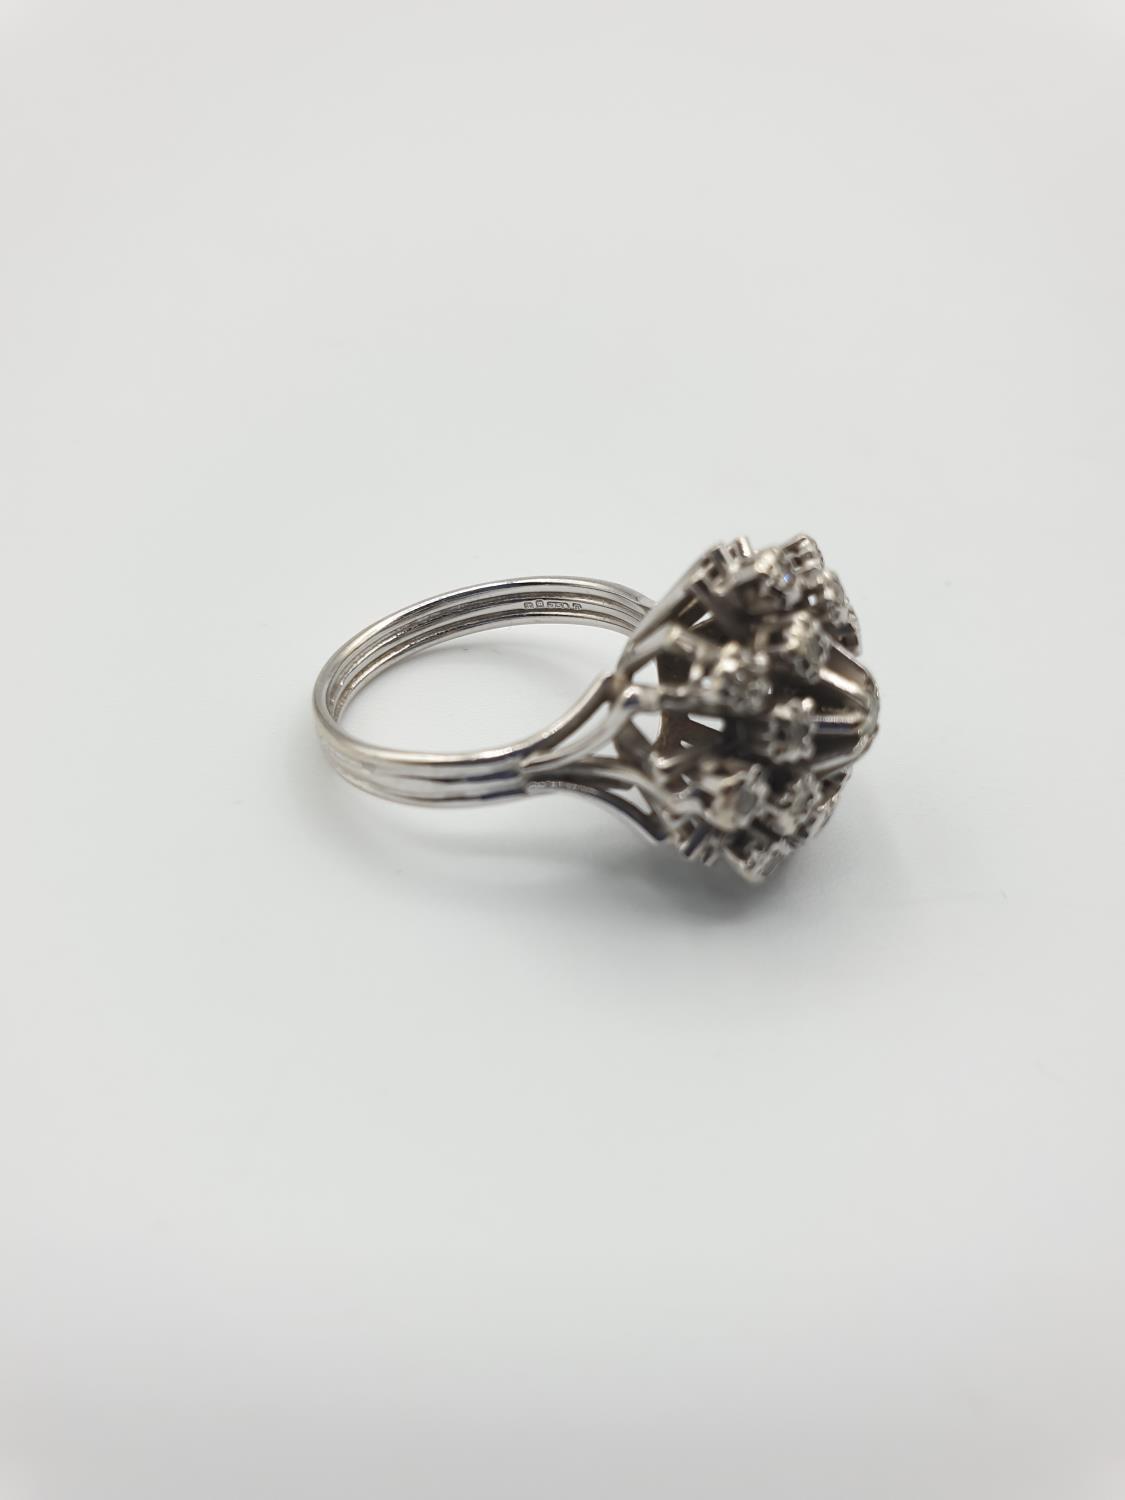 18CT WHITE GOLD DIAMOND CLUSTER RING, SIZE M WEIGHT 6.2G. Hallmark inside the band showing 750 for - Image 5 of 6